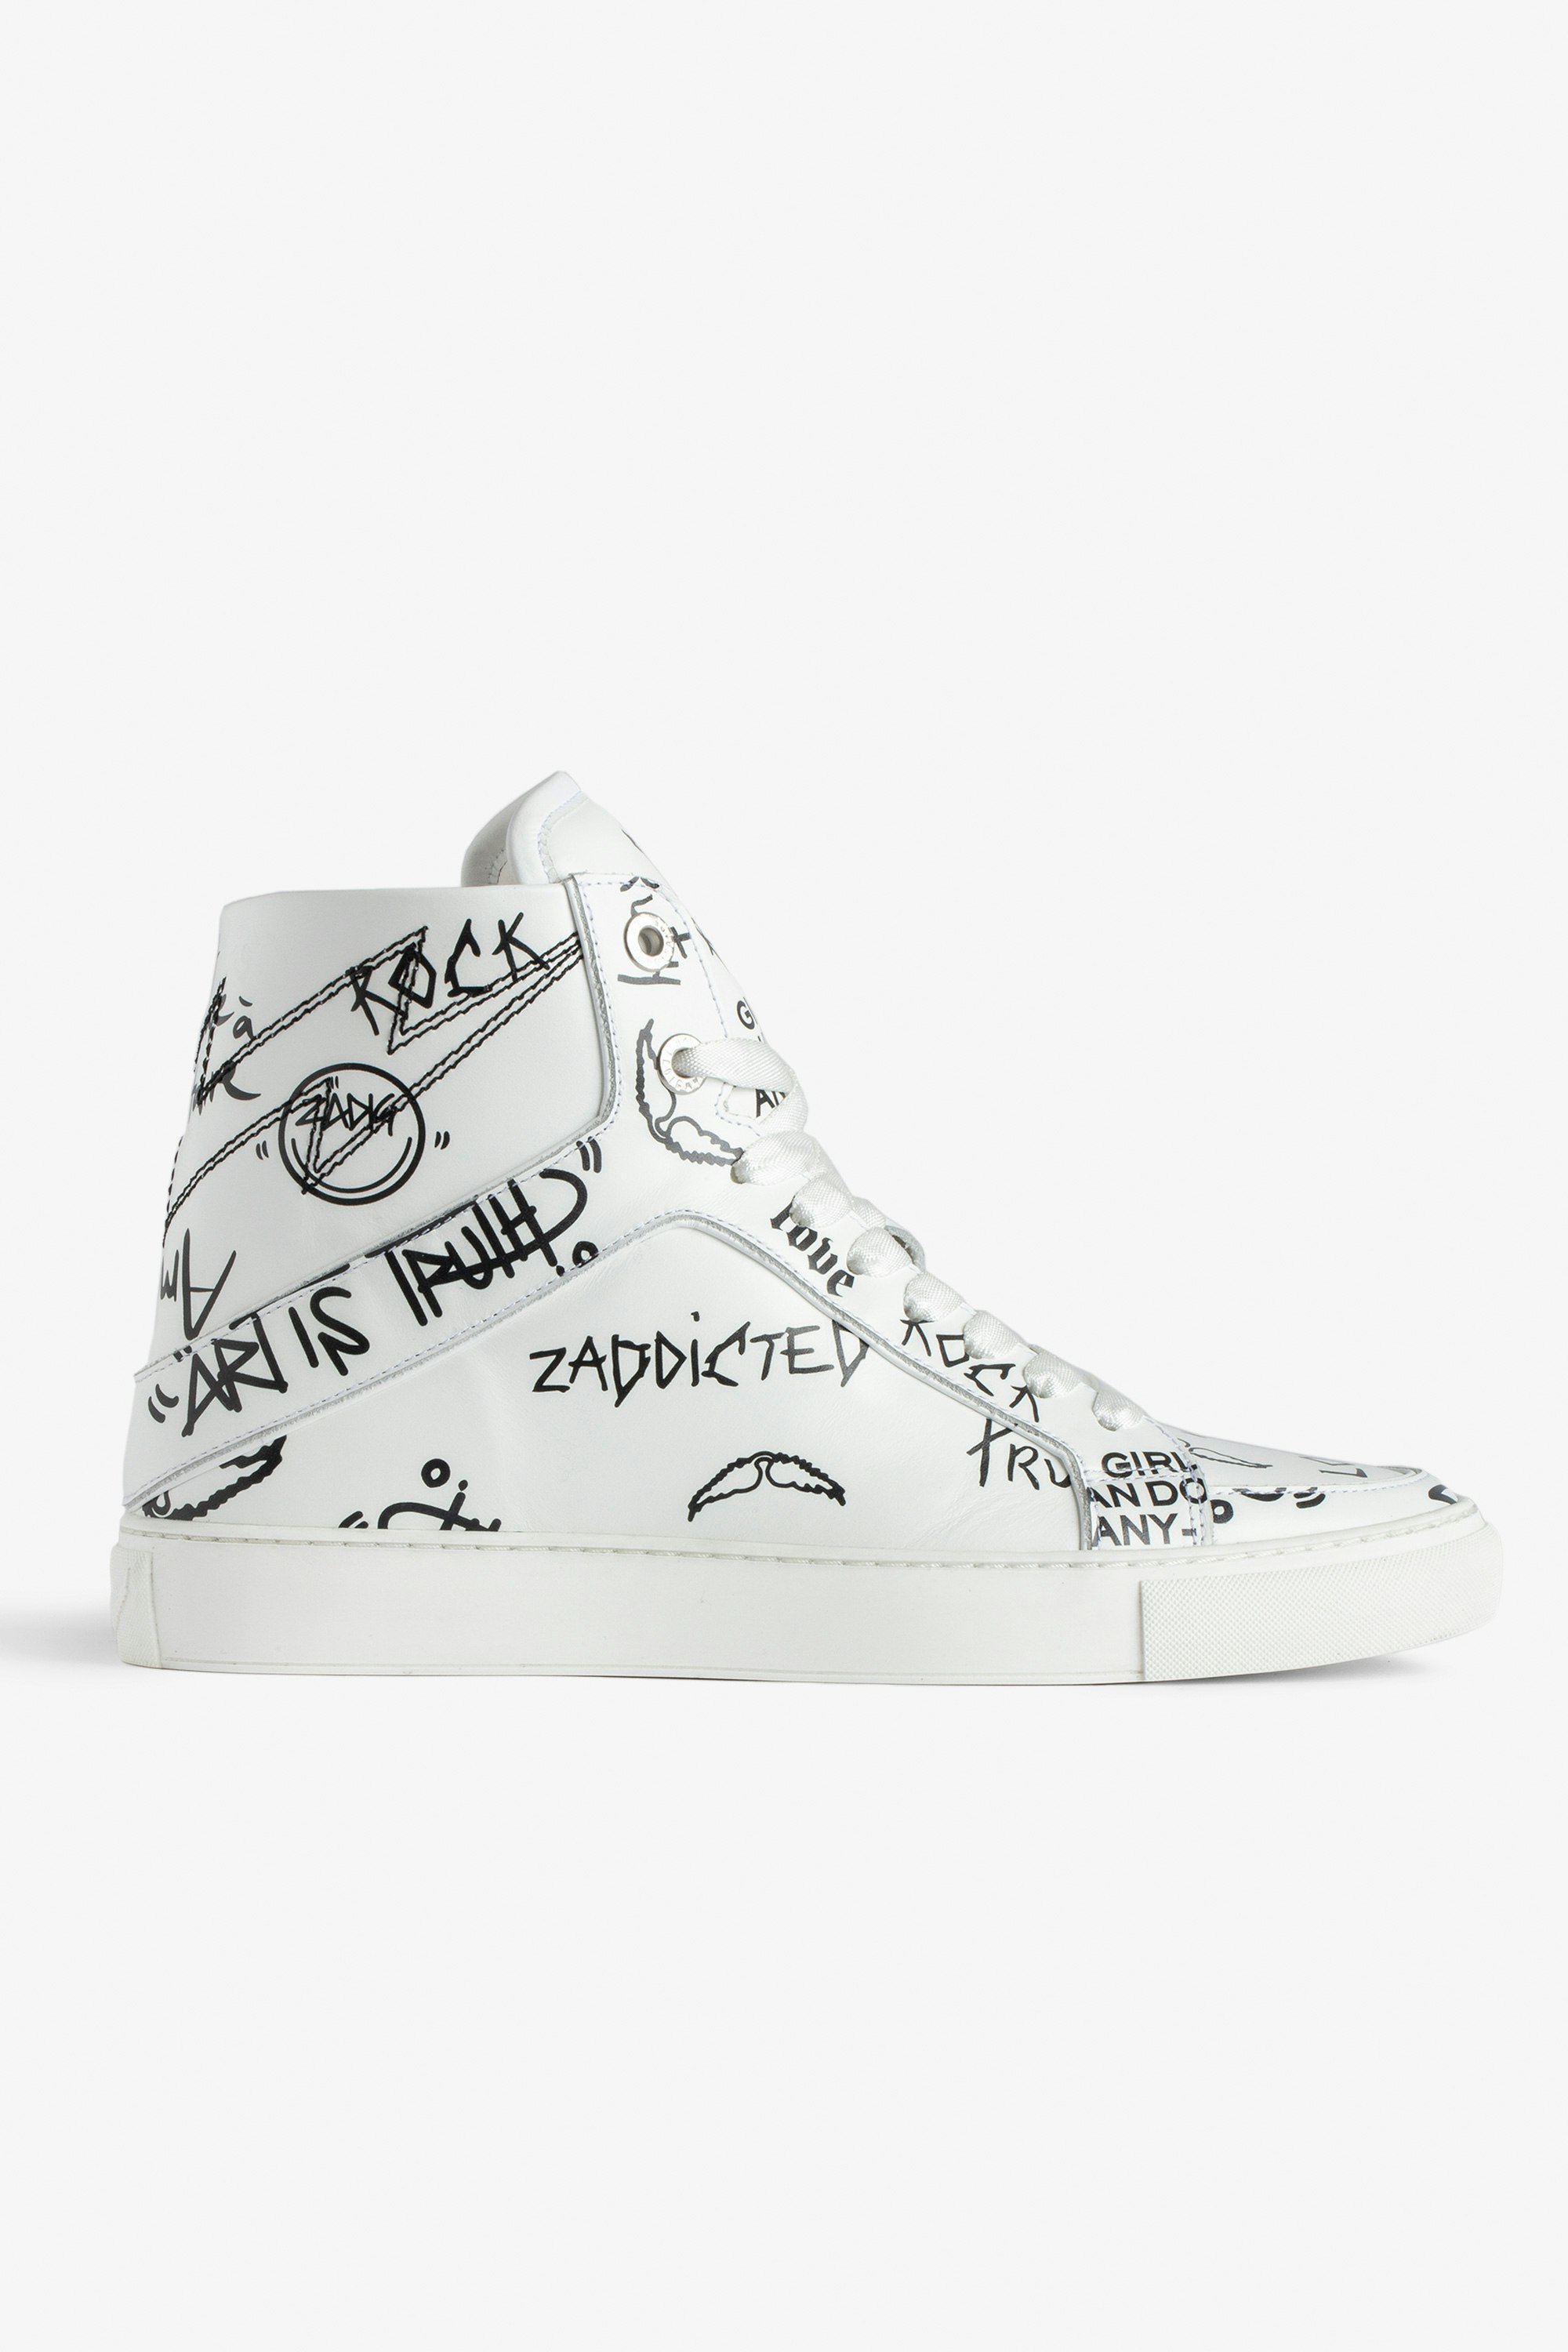 ZV1747 High Flash High-Top Graffiti Sneakers  - Women’s ecru smooth leather high-top sneakers with lightning bolt panels and graffiti.